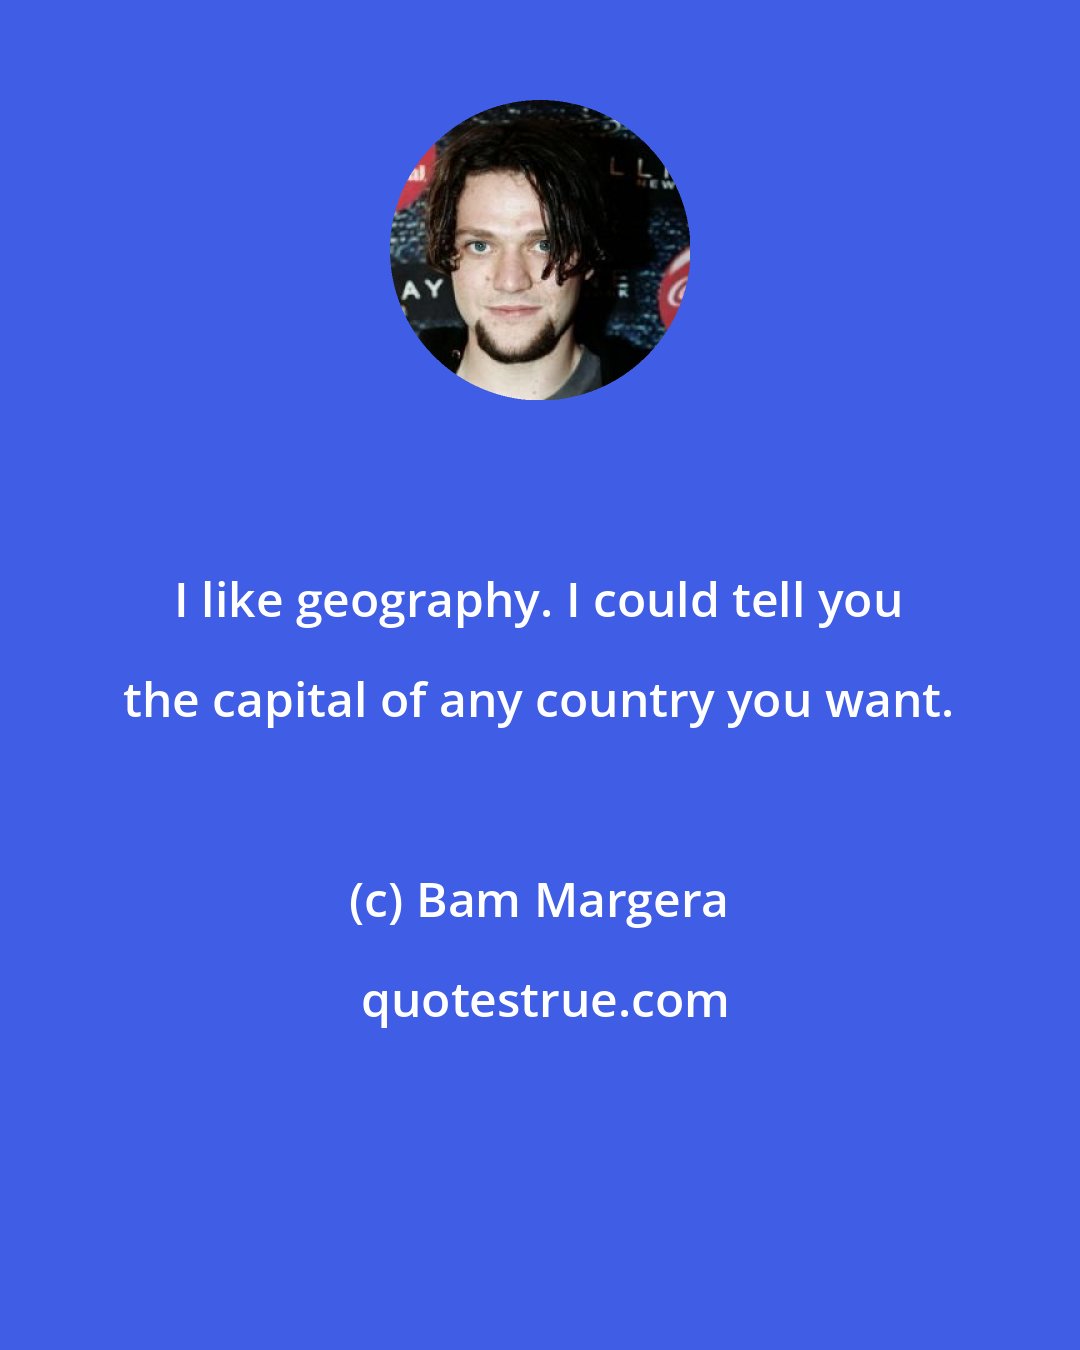 Bam Margera: I like geography. I could tell you the capital of any country you want.